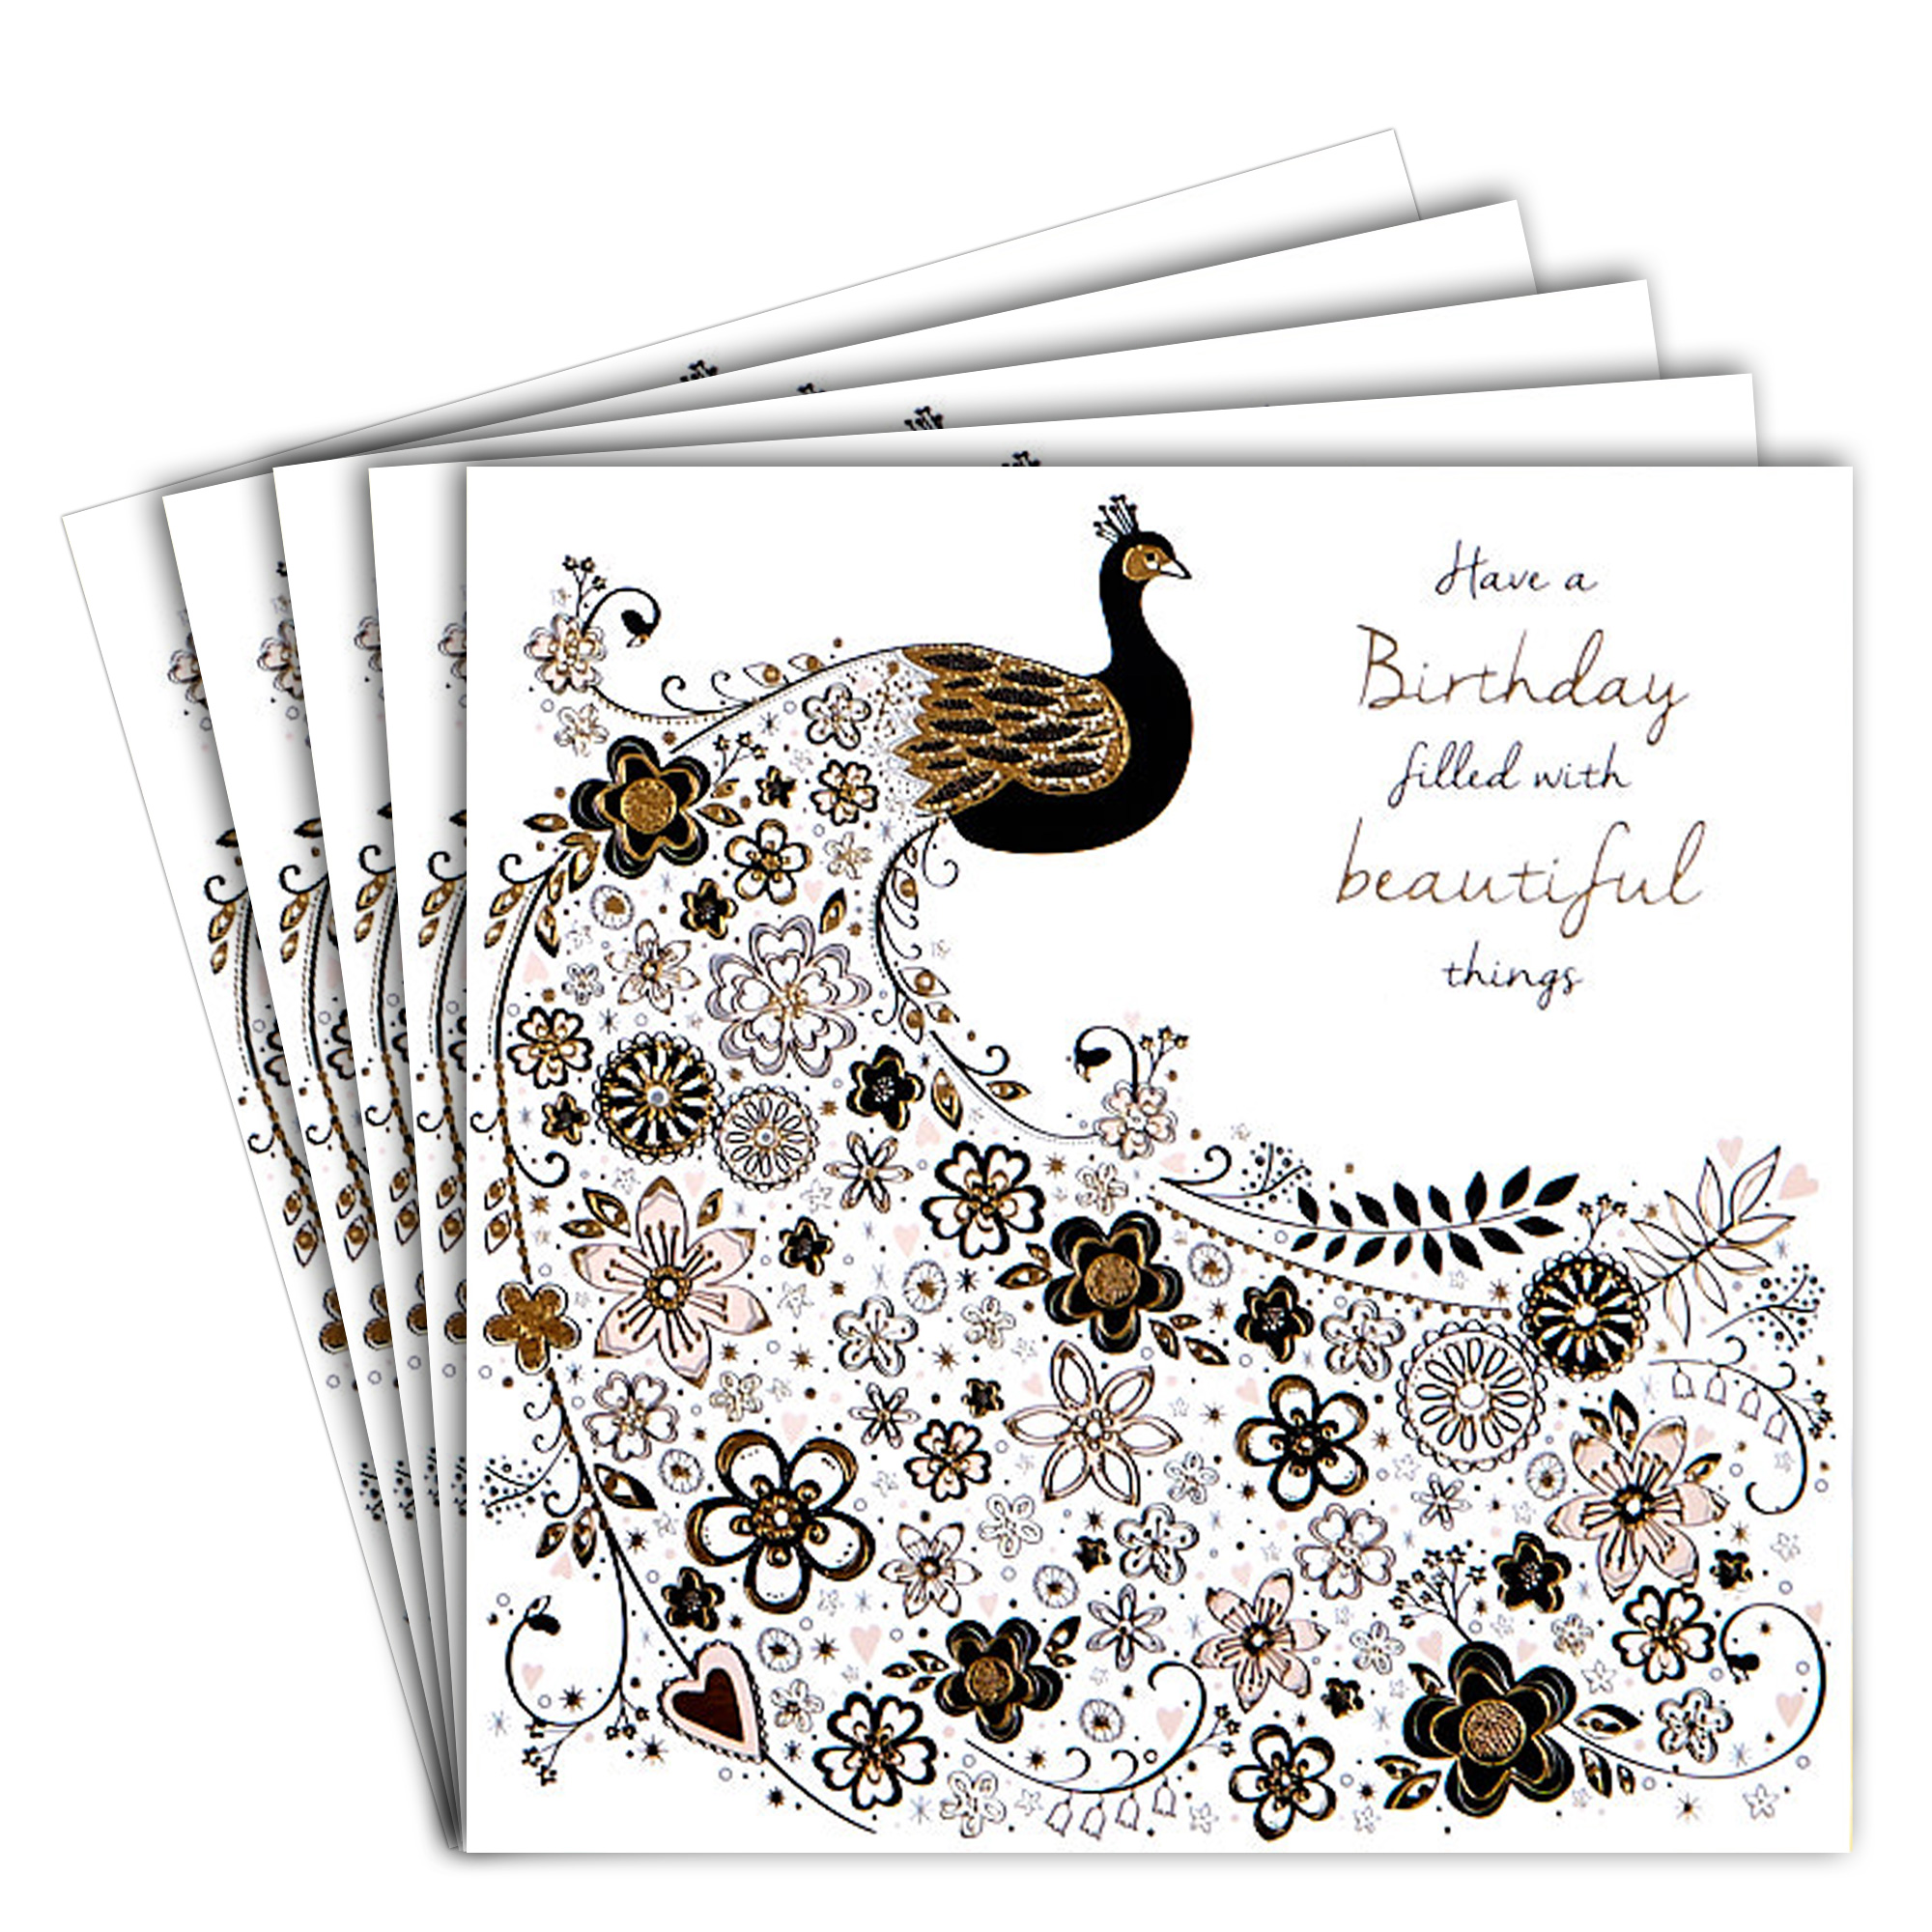 12 Birthday Cards - Filled With Beautiful Things 